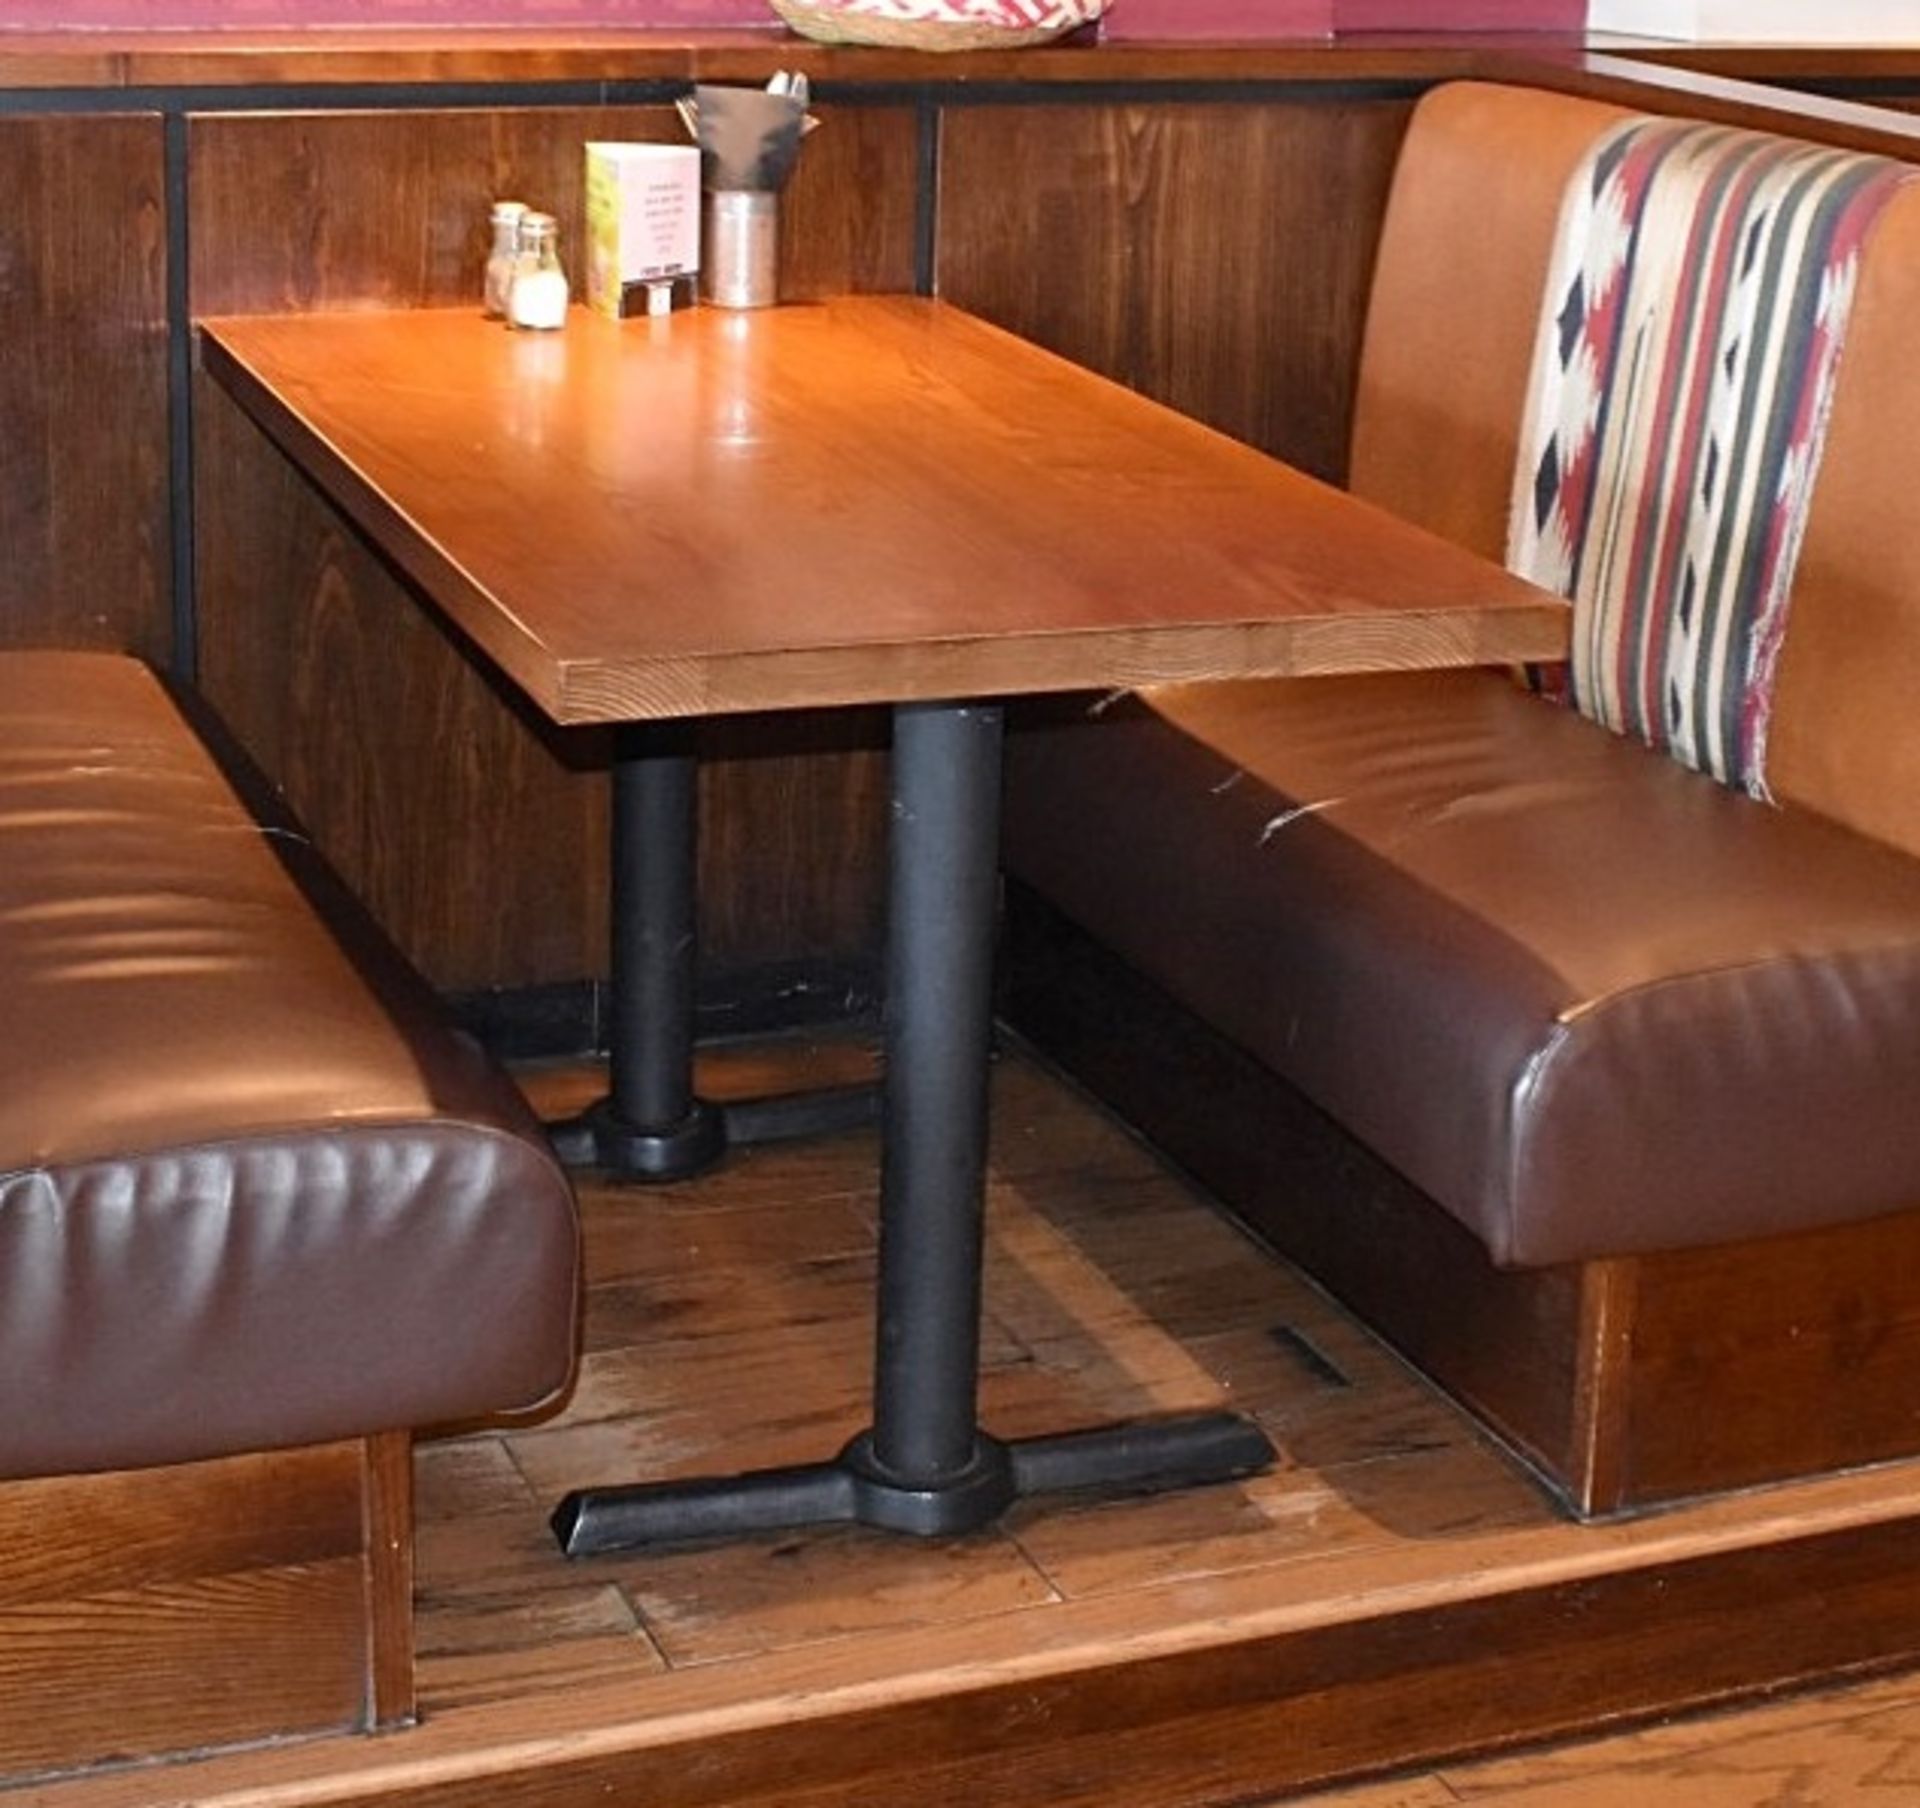 1 x Long Restaurant Dining Table With A Dark Wooden Top And Cast Iron Base - Image 2 of 3